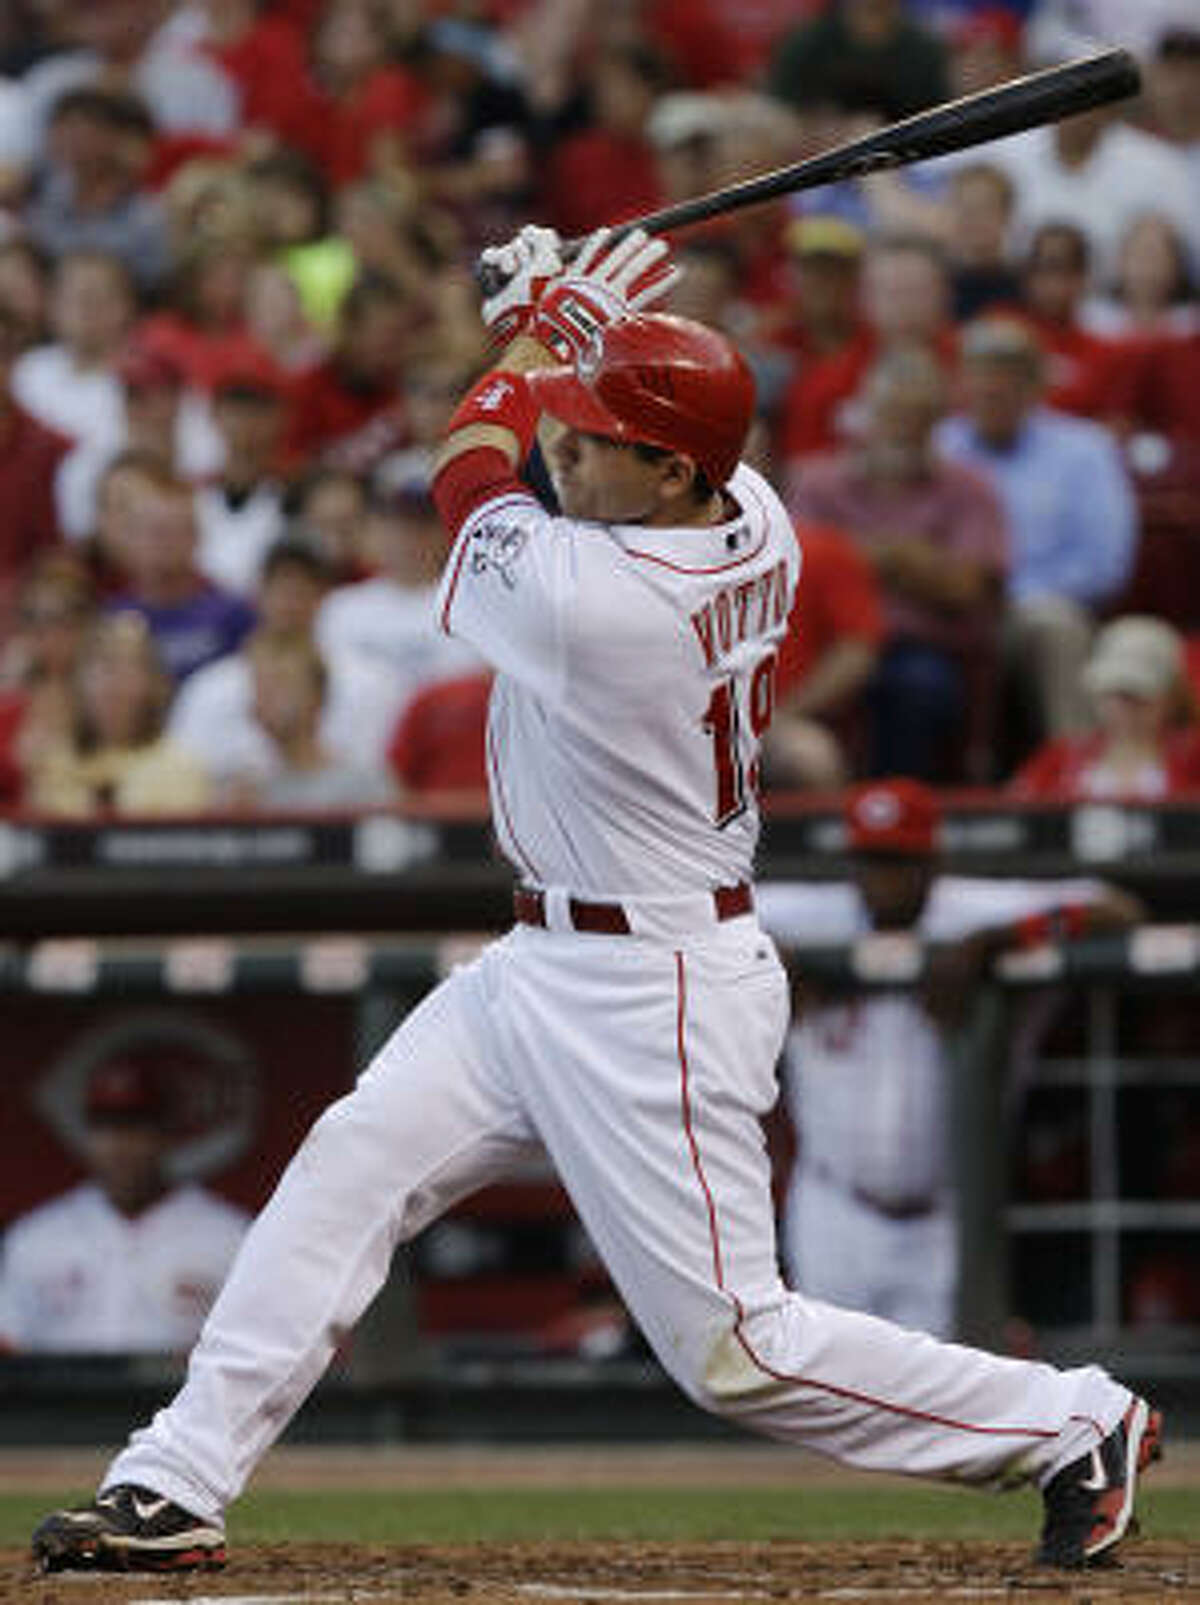 National League Joey Votto, Reds: The first baseman lost out to Albert Pujols, Ryan Howard and Adrian Gonzalez, even though their numbers aren't quite as good Votto's this year. Votto is a final vote candidate.